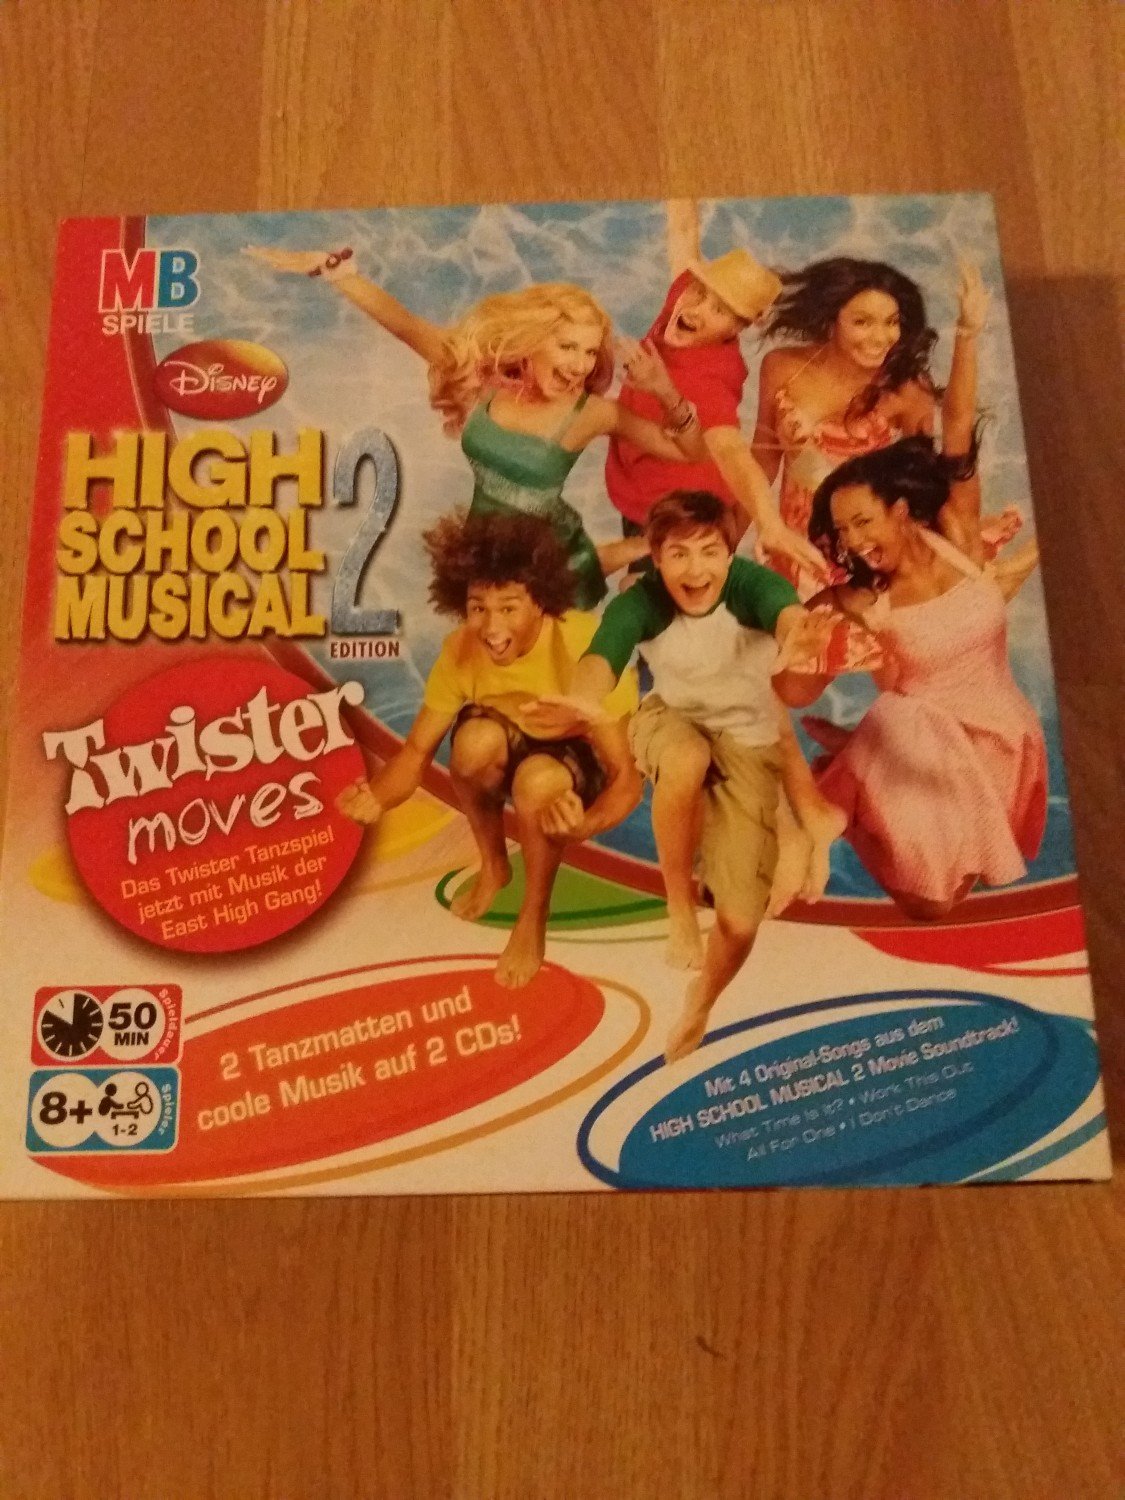 Twister Moves High School Musical 2 - MB Jeux - Ludessimo - jeux